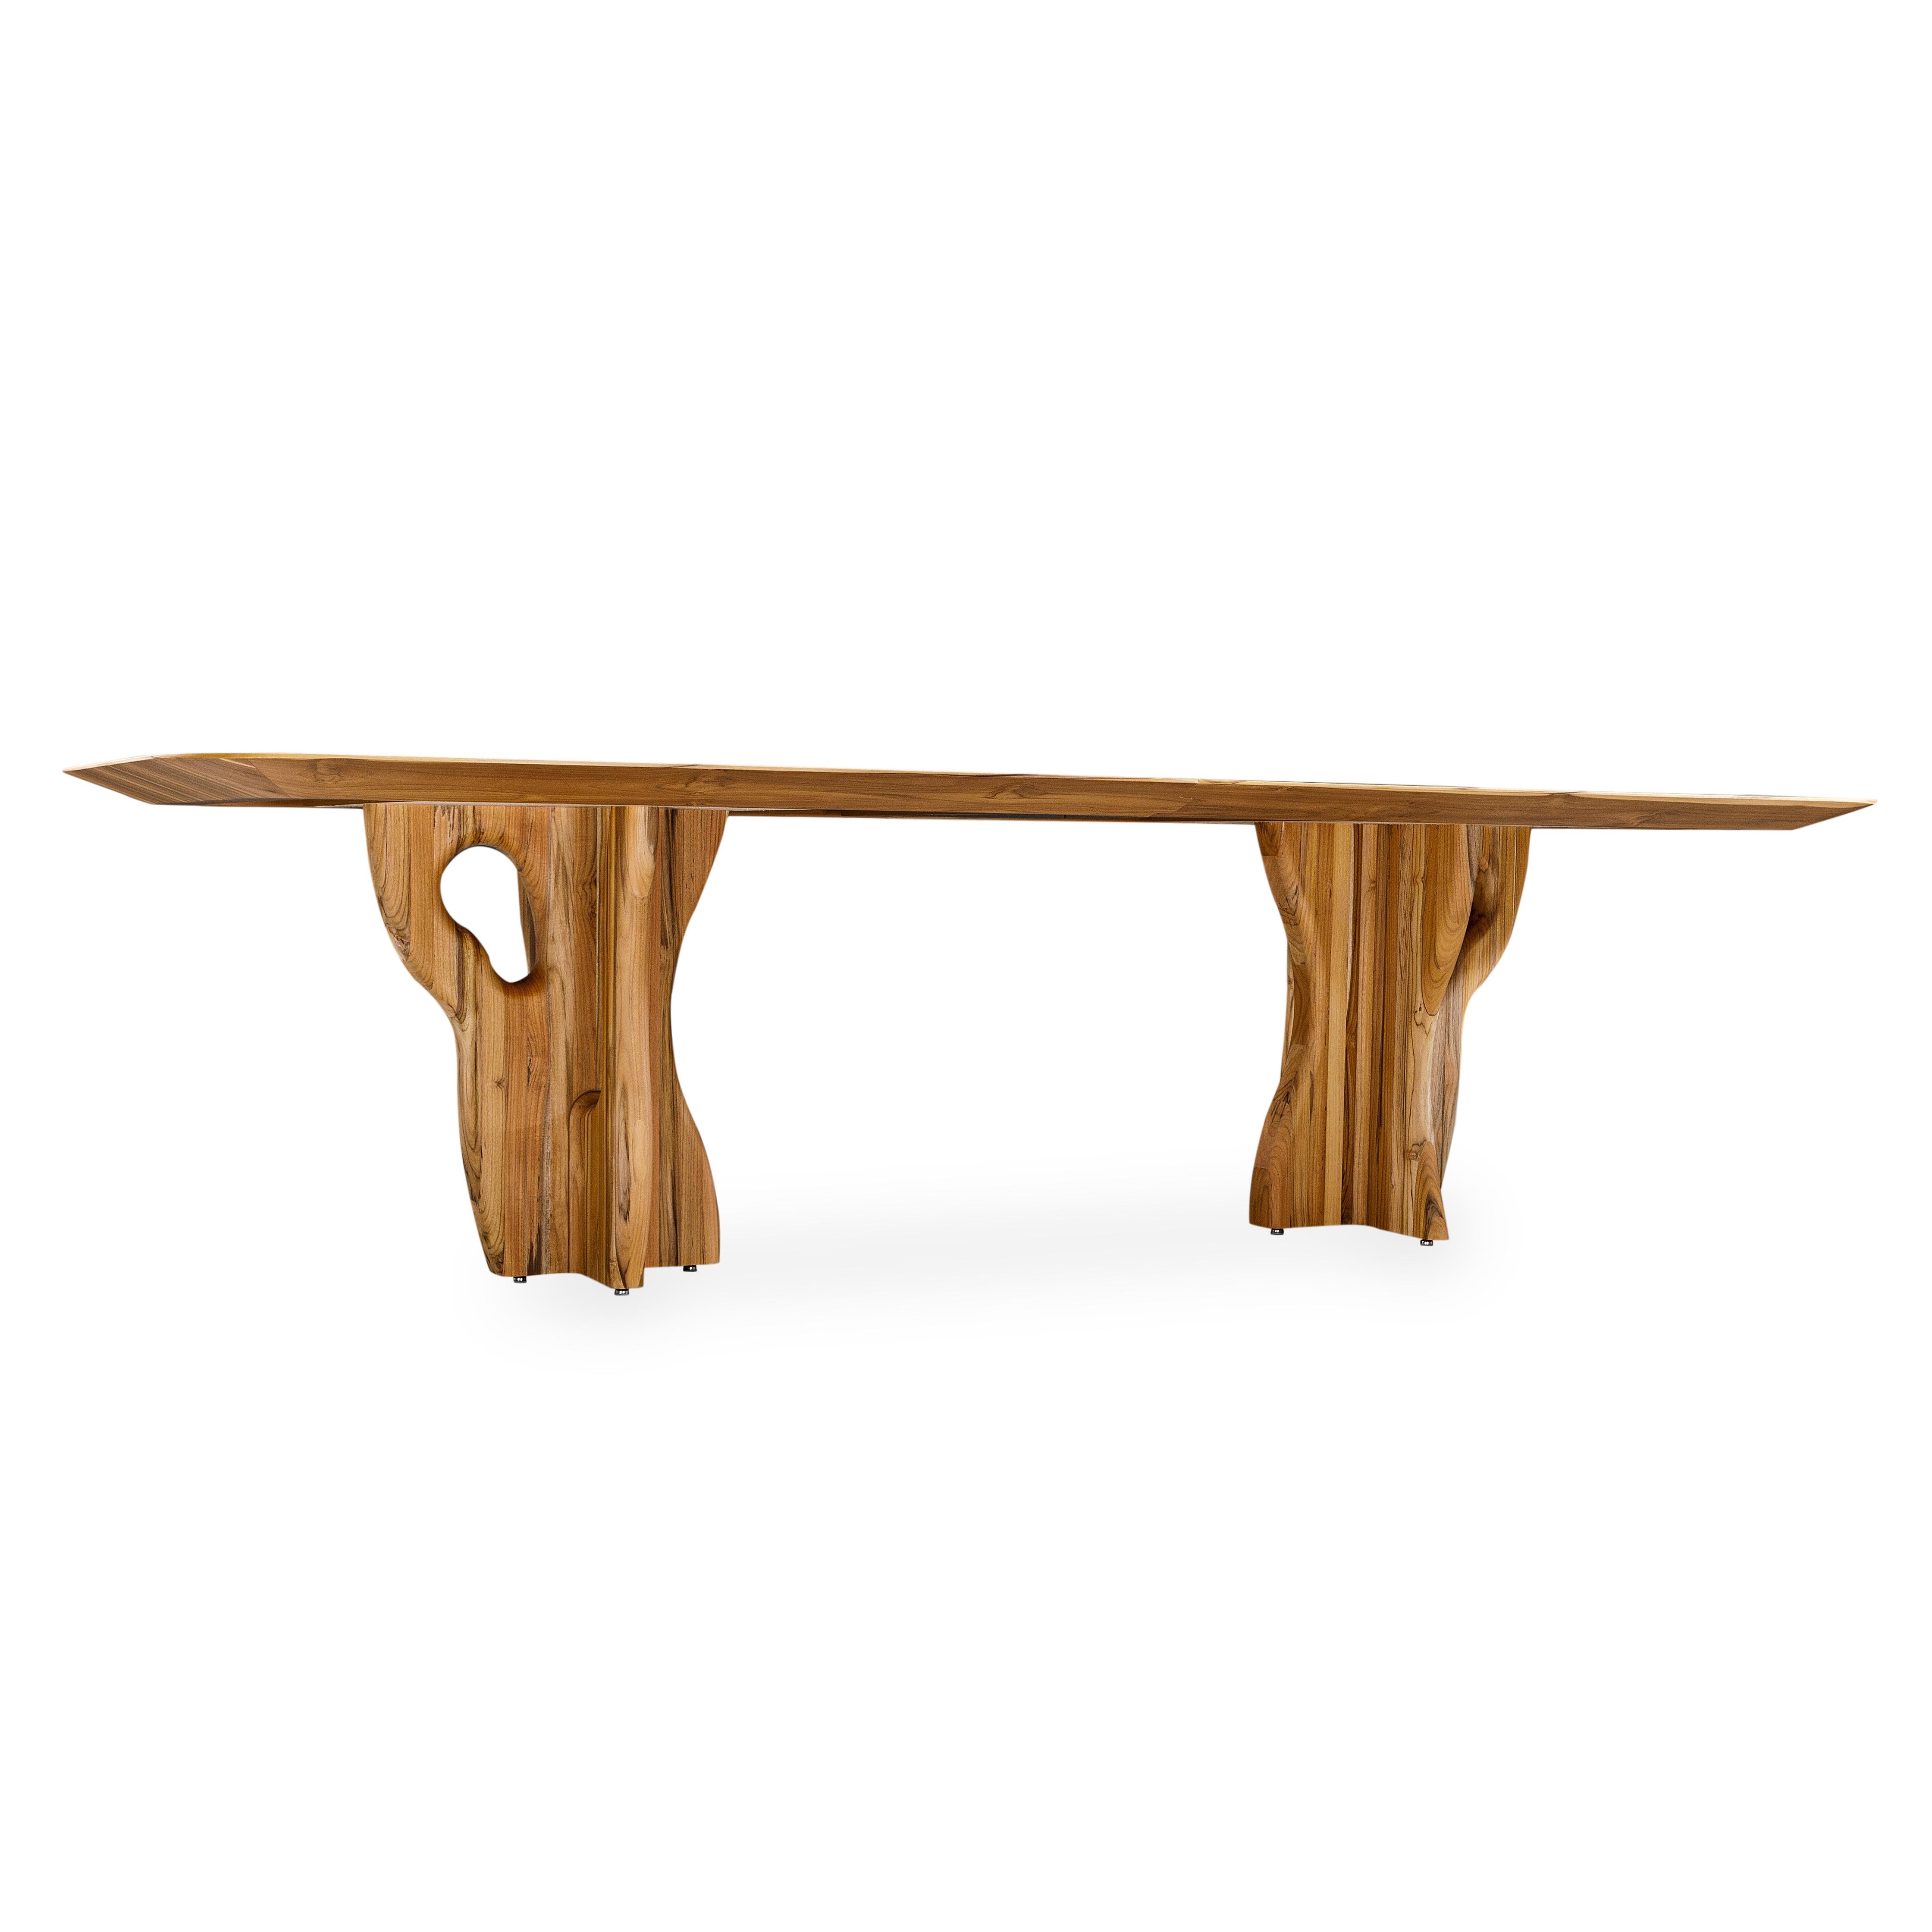 Brazilian Suma Dining Table with Teak Veneered Top and Organic Solid Wood Legs 110'' For Sale